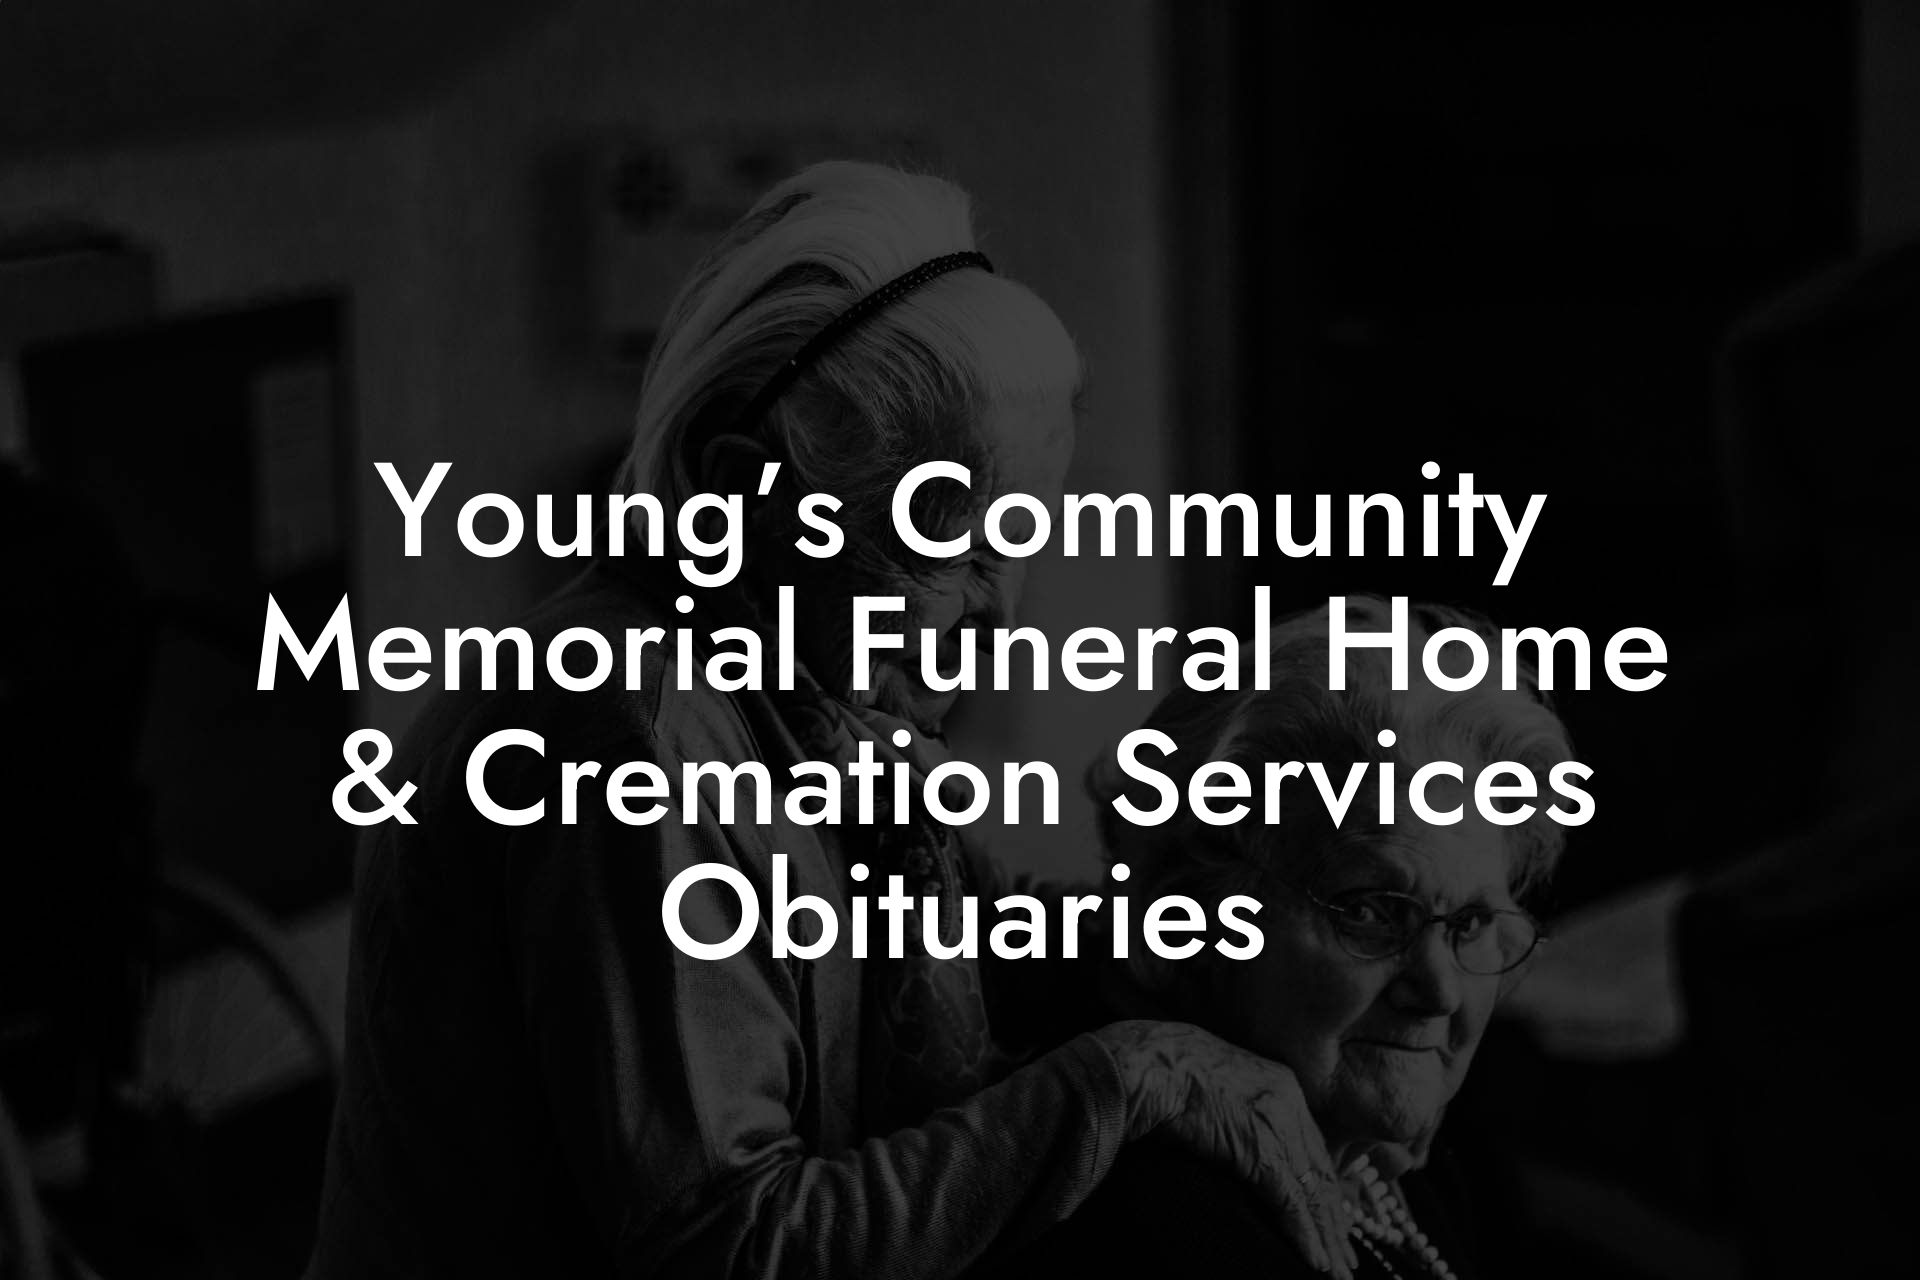 Young’s Community Memorial Funeral Home & Cremation Services Obituaries